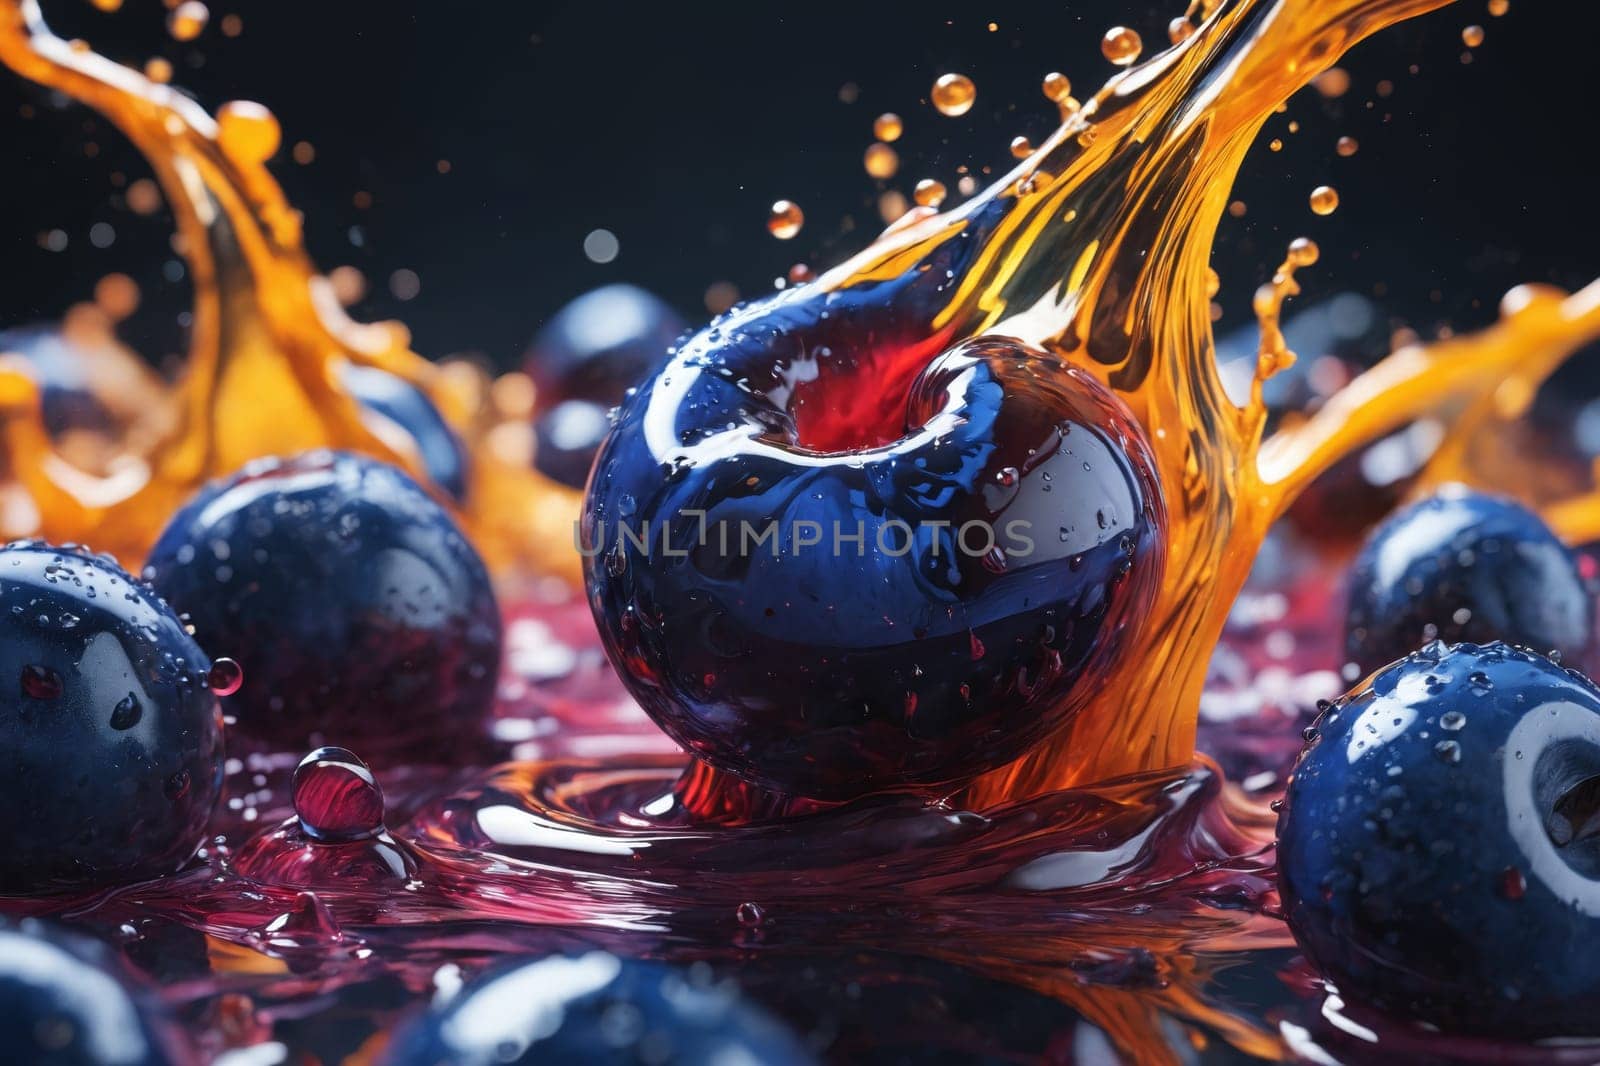 Juicy Deluge: Fruits and Bursting Oranges in Water Splash by Andre1ns